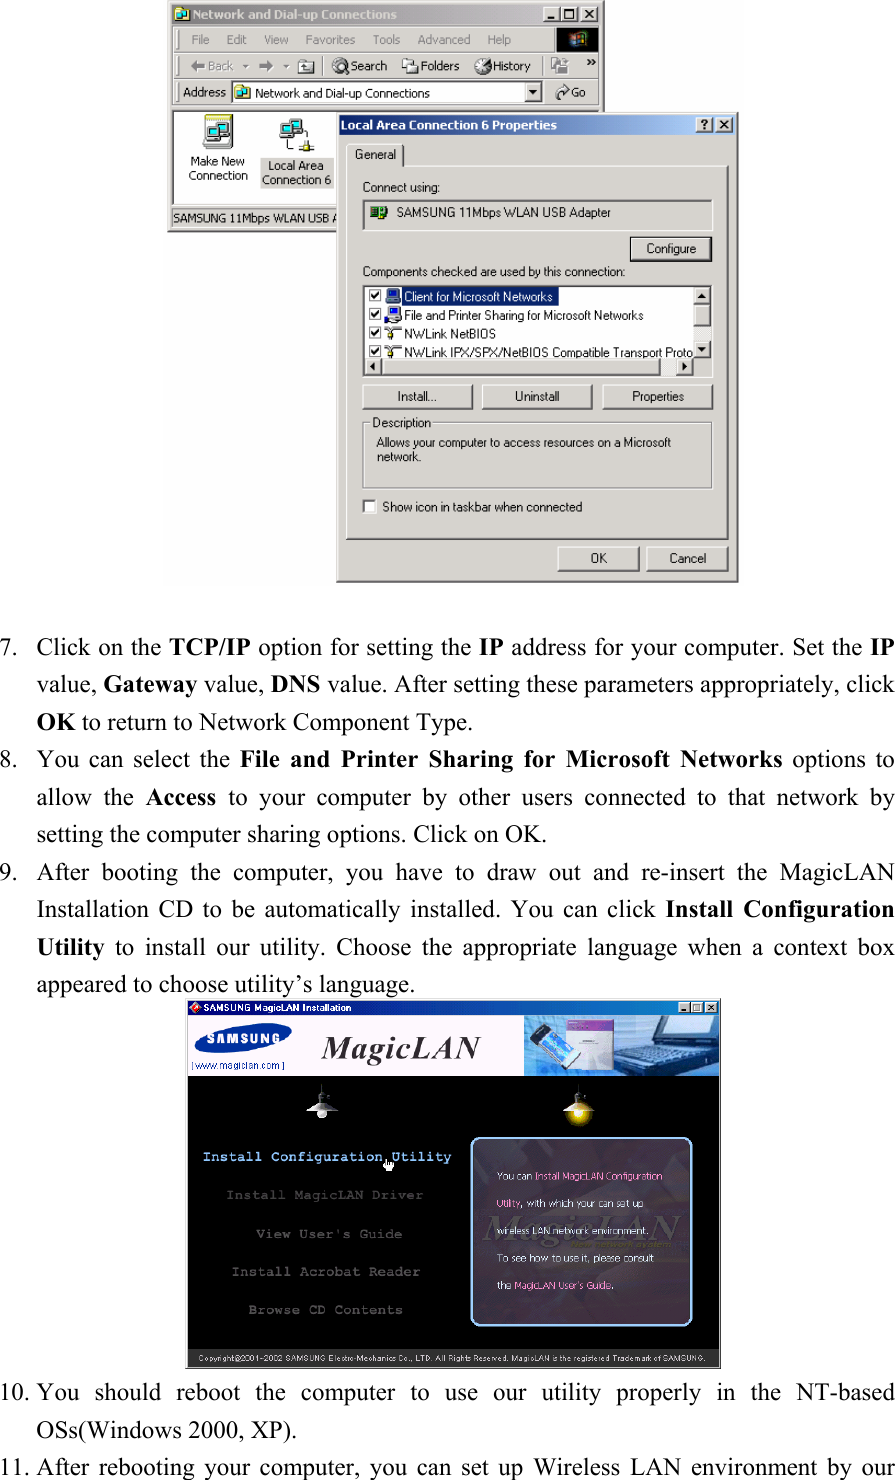    7. Click on the TCP/IP option for setting the IP address for your computer. Set the IP value, Gateway value, DNS value. After setting these parameters appropriately, click OK to return to Network Component Type. 8. You can select the File and Printer Sharing for Microsoft Networks options to allow the Access  to your computer by other users connected to that network by setting the computer sharing options. Click on OK. 9. After booting the computer, you have to draw out and re-insert the MagicLAN Installation CD to be automatically installed. You can click Install Configuration Utility to install our utility. Choose the appropriate language when a context box appeared to choose utility’s language.   10. You should reboot the computer to use our utility properly in the NT-based OSs(Windows 2000, XP). 11. After rebooting your computer, you can set up Wireless LAN environment by our 